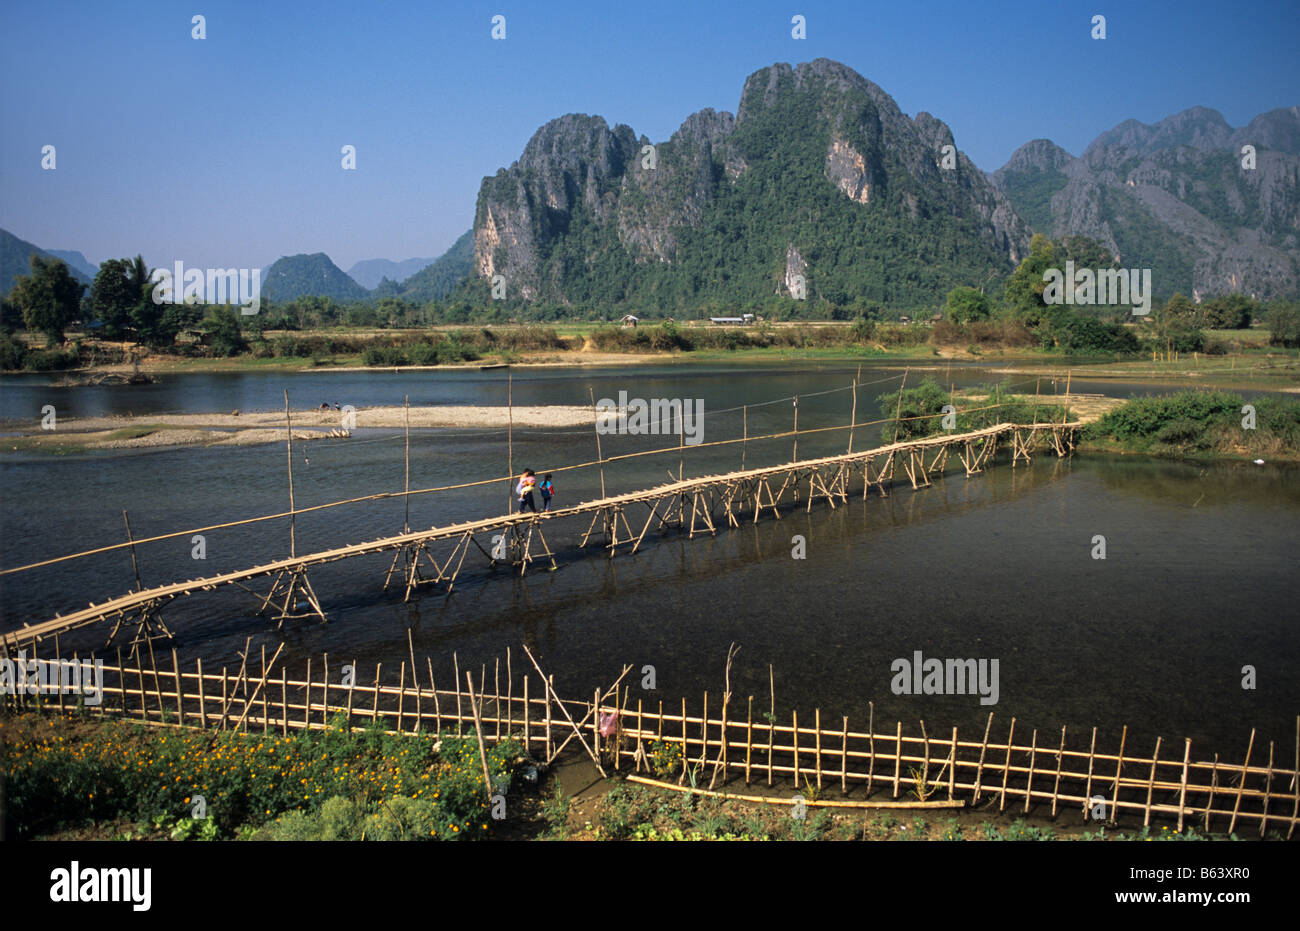 Bamboo bridge across River Song, a Mekong tributary, at Vang Vieng, Laos with limestone karst hills in background. Stock Photo